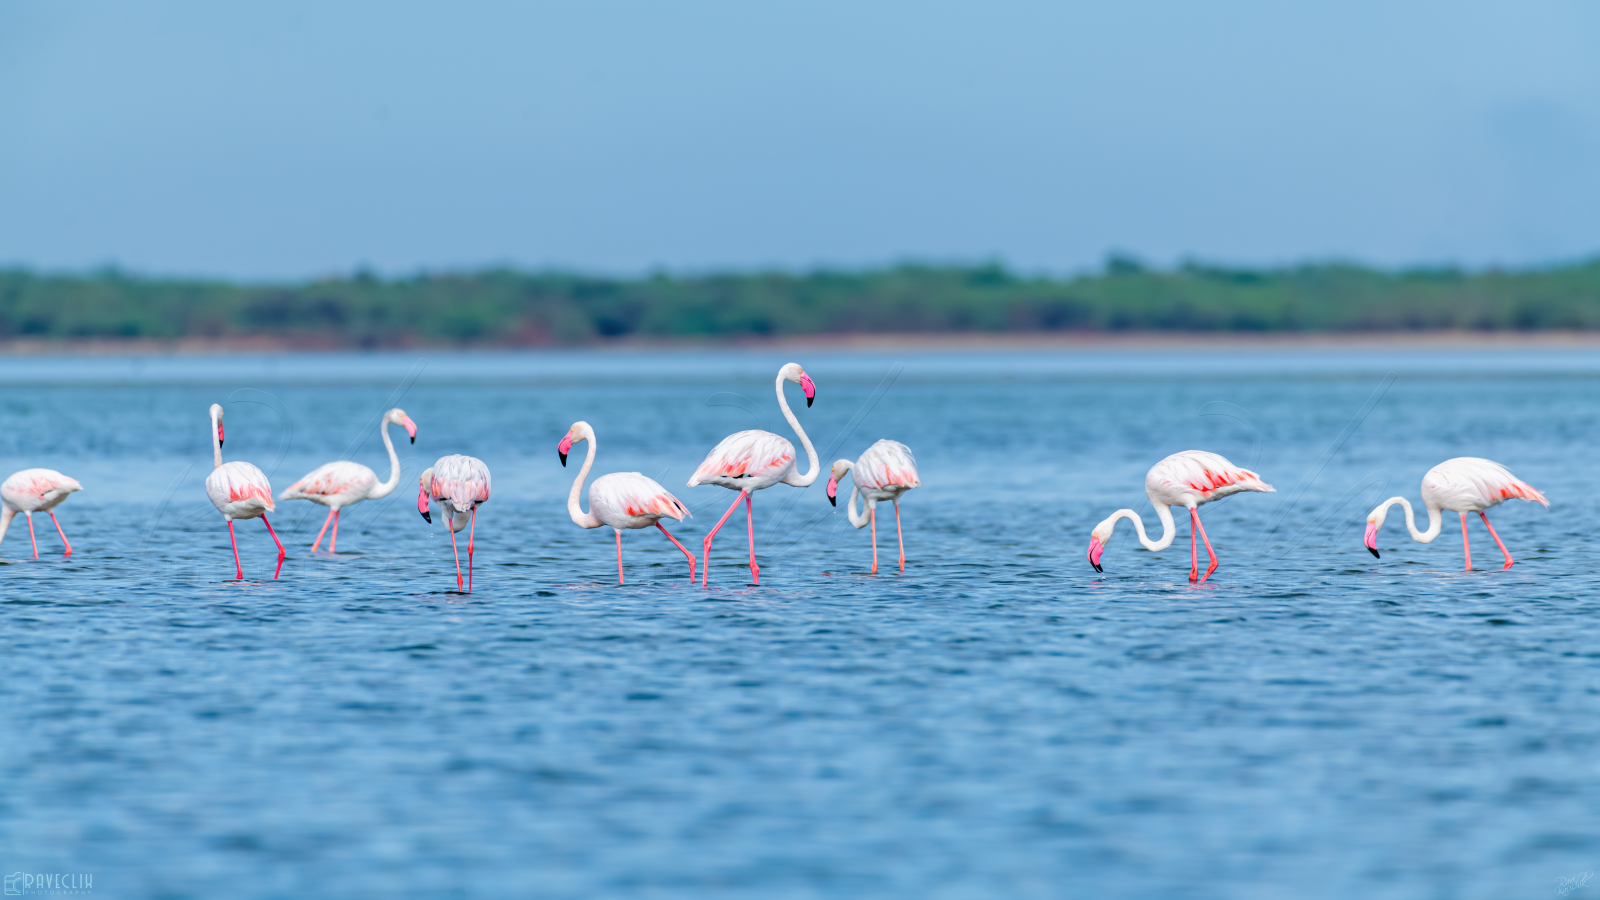 "Family Time" - Greater Flamingo(s)